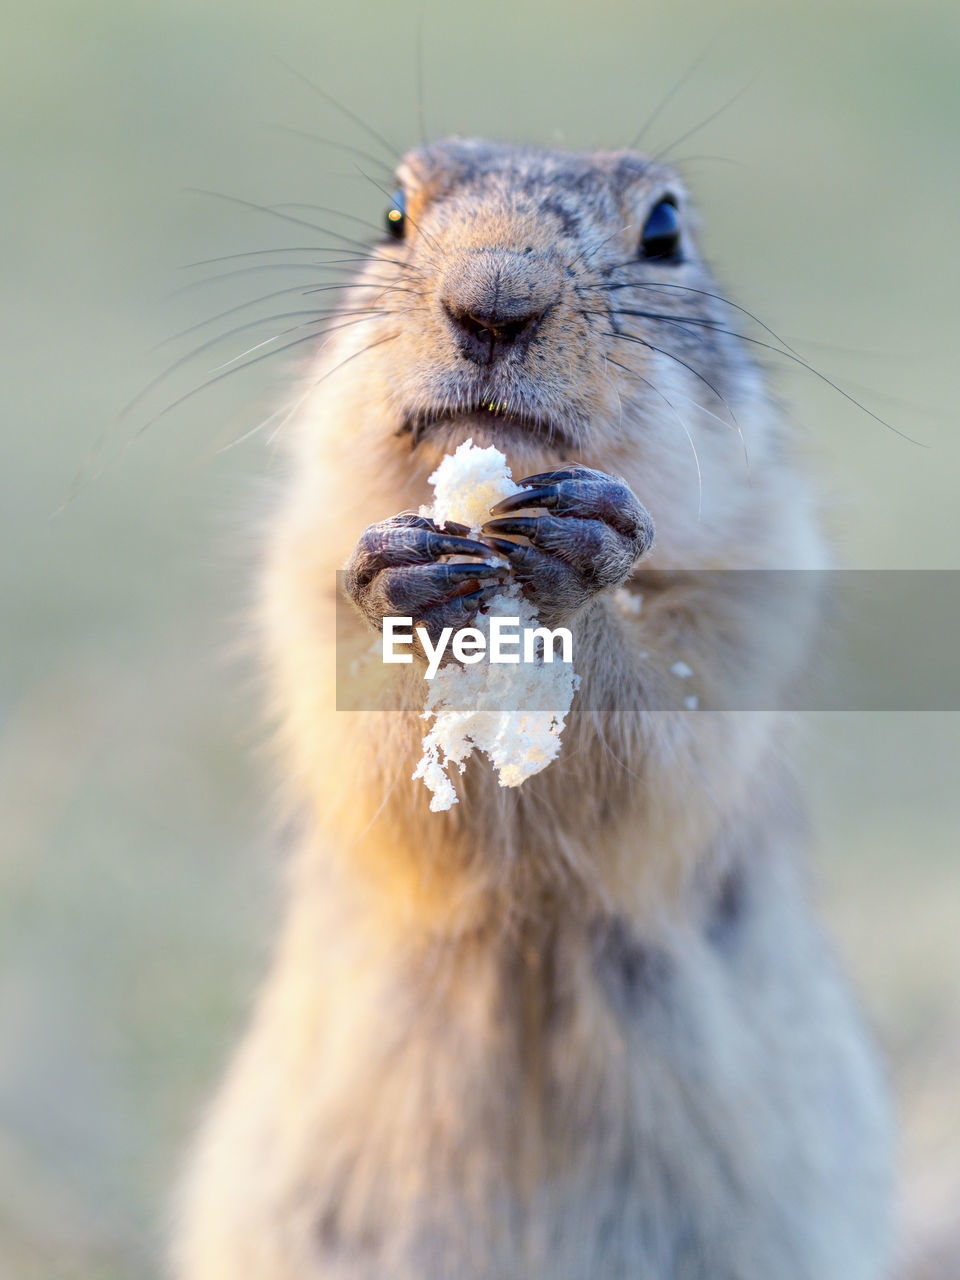 animal, animal themes, one animal, animal wildlife, mammal, whiskers, wildlife, close-up, squirrel, portrait, no people, animal body part, nature, looking at camera, outdoors, animal head, focus on foreground, eating, day, rodent